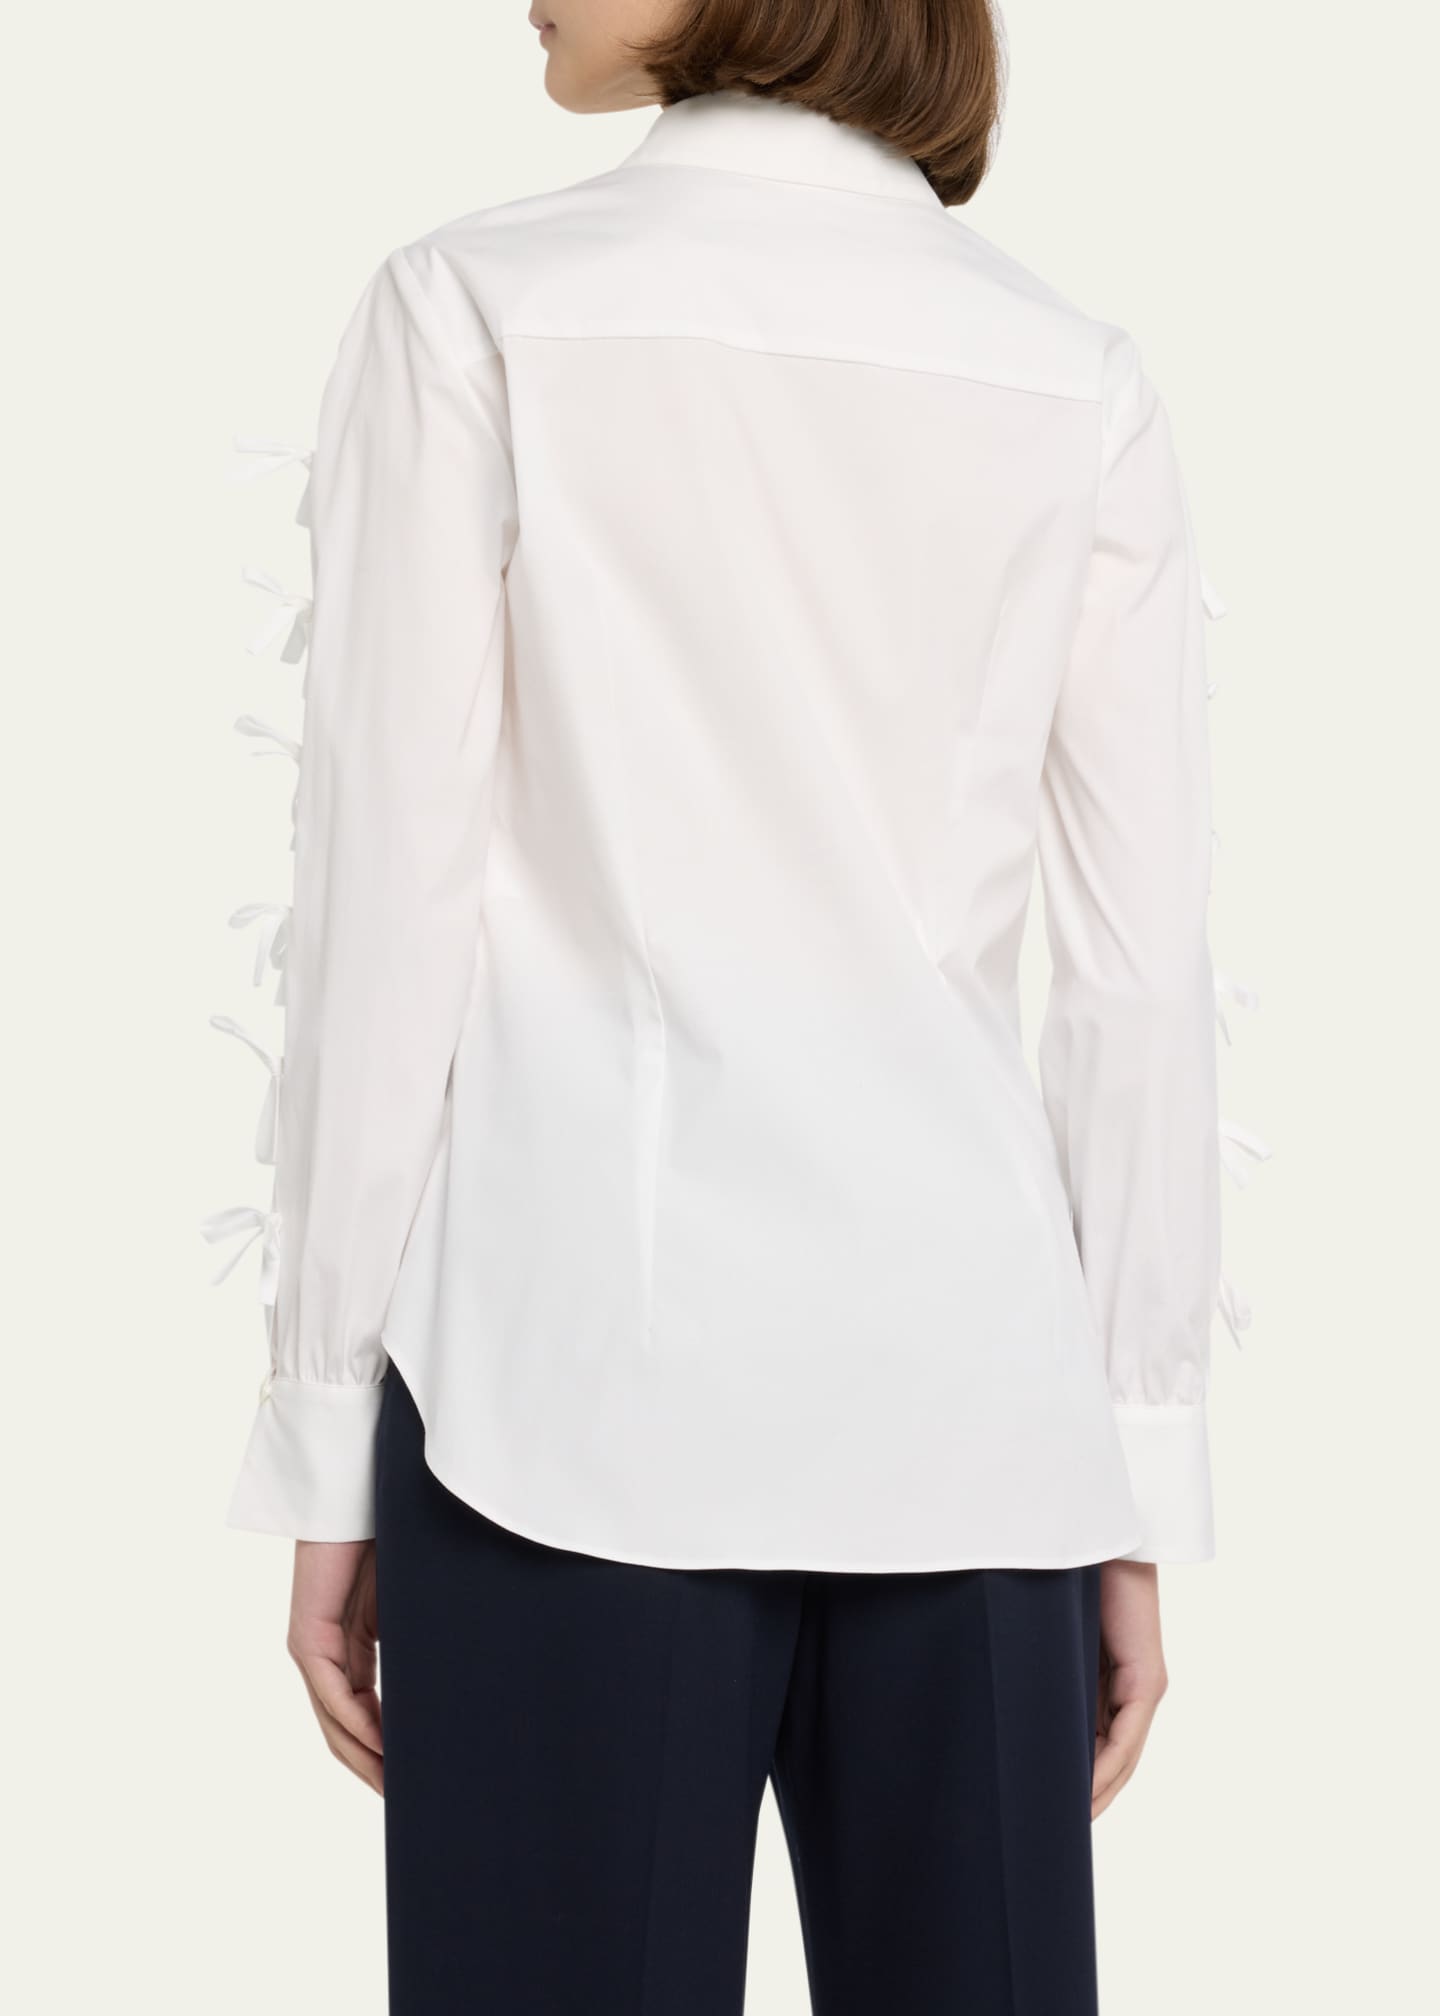 Carolina Herrera Button-Front Blouse with Bow Details - Bergdorf Goodman